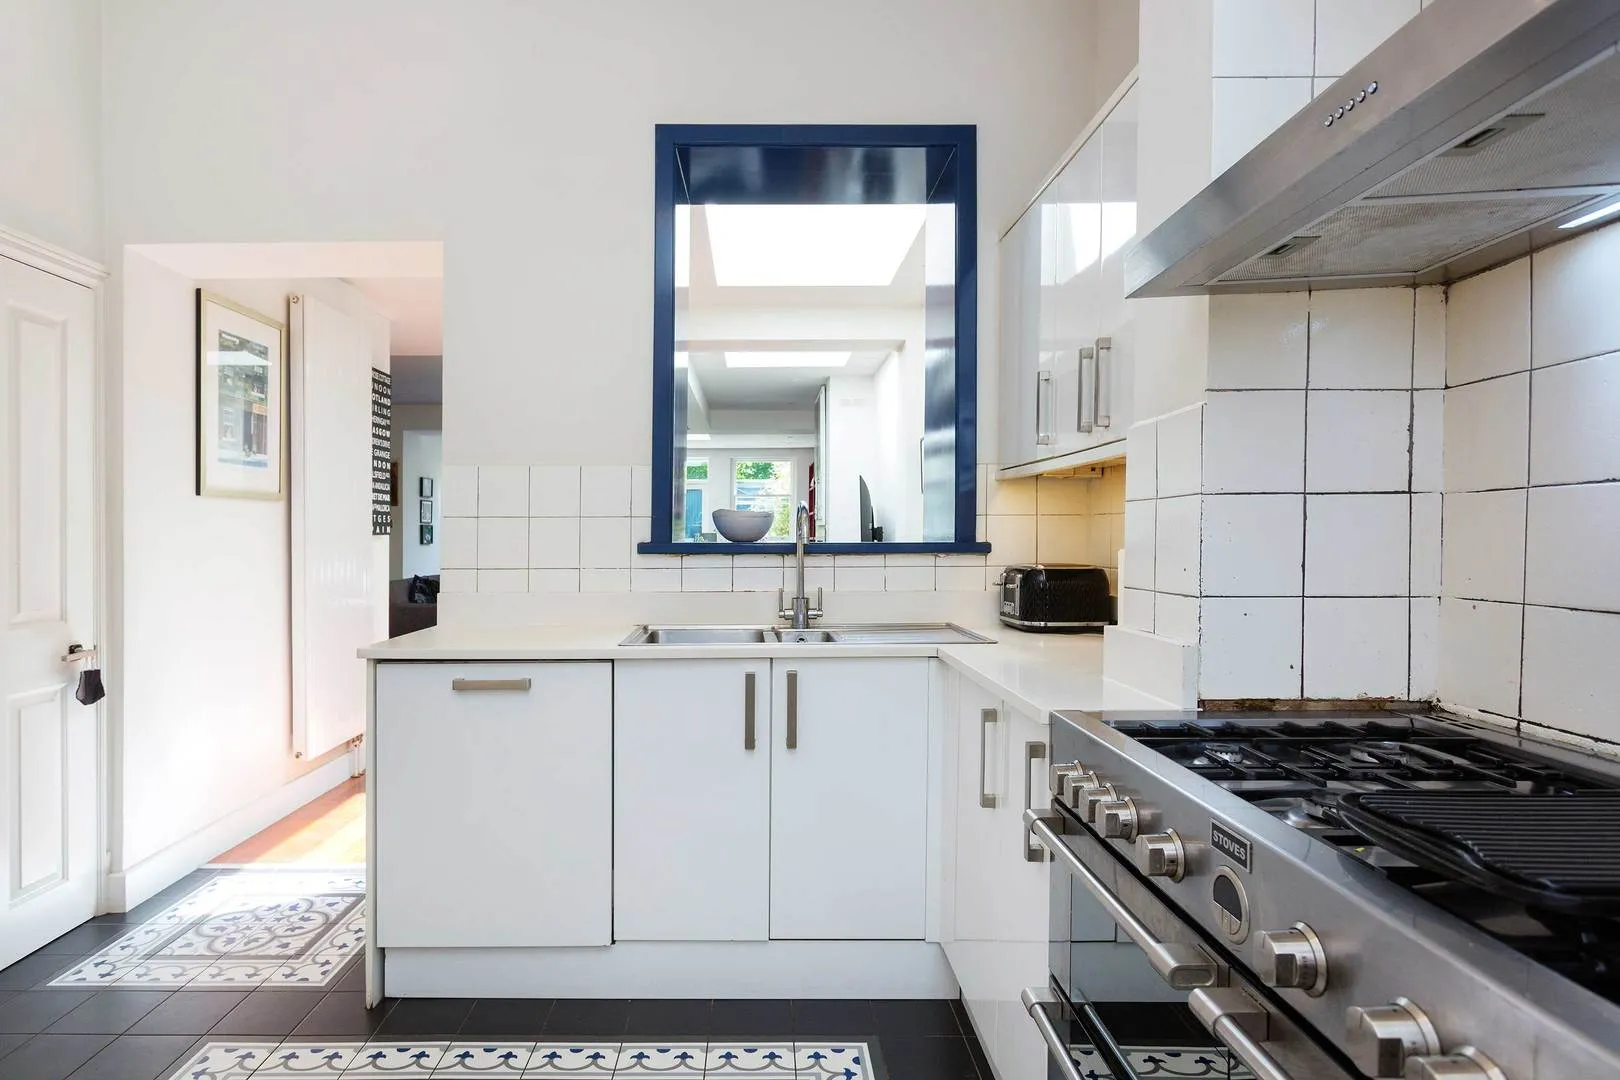 Earlsfield Road, holiday home in Wandsworth, London